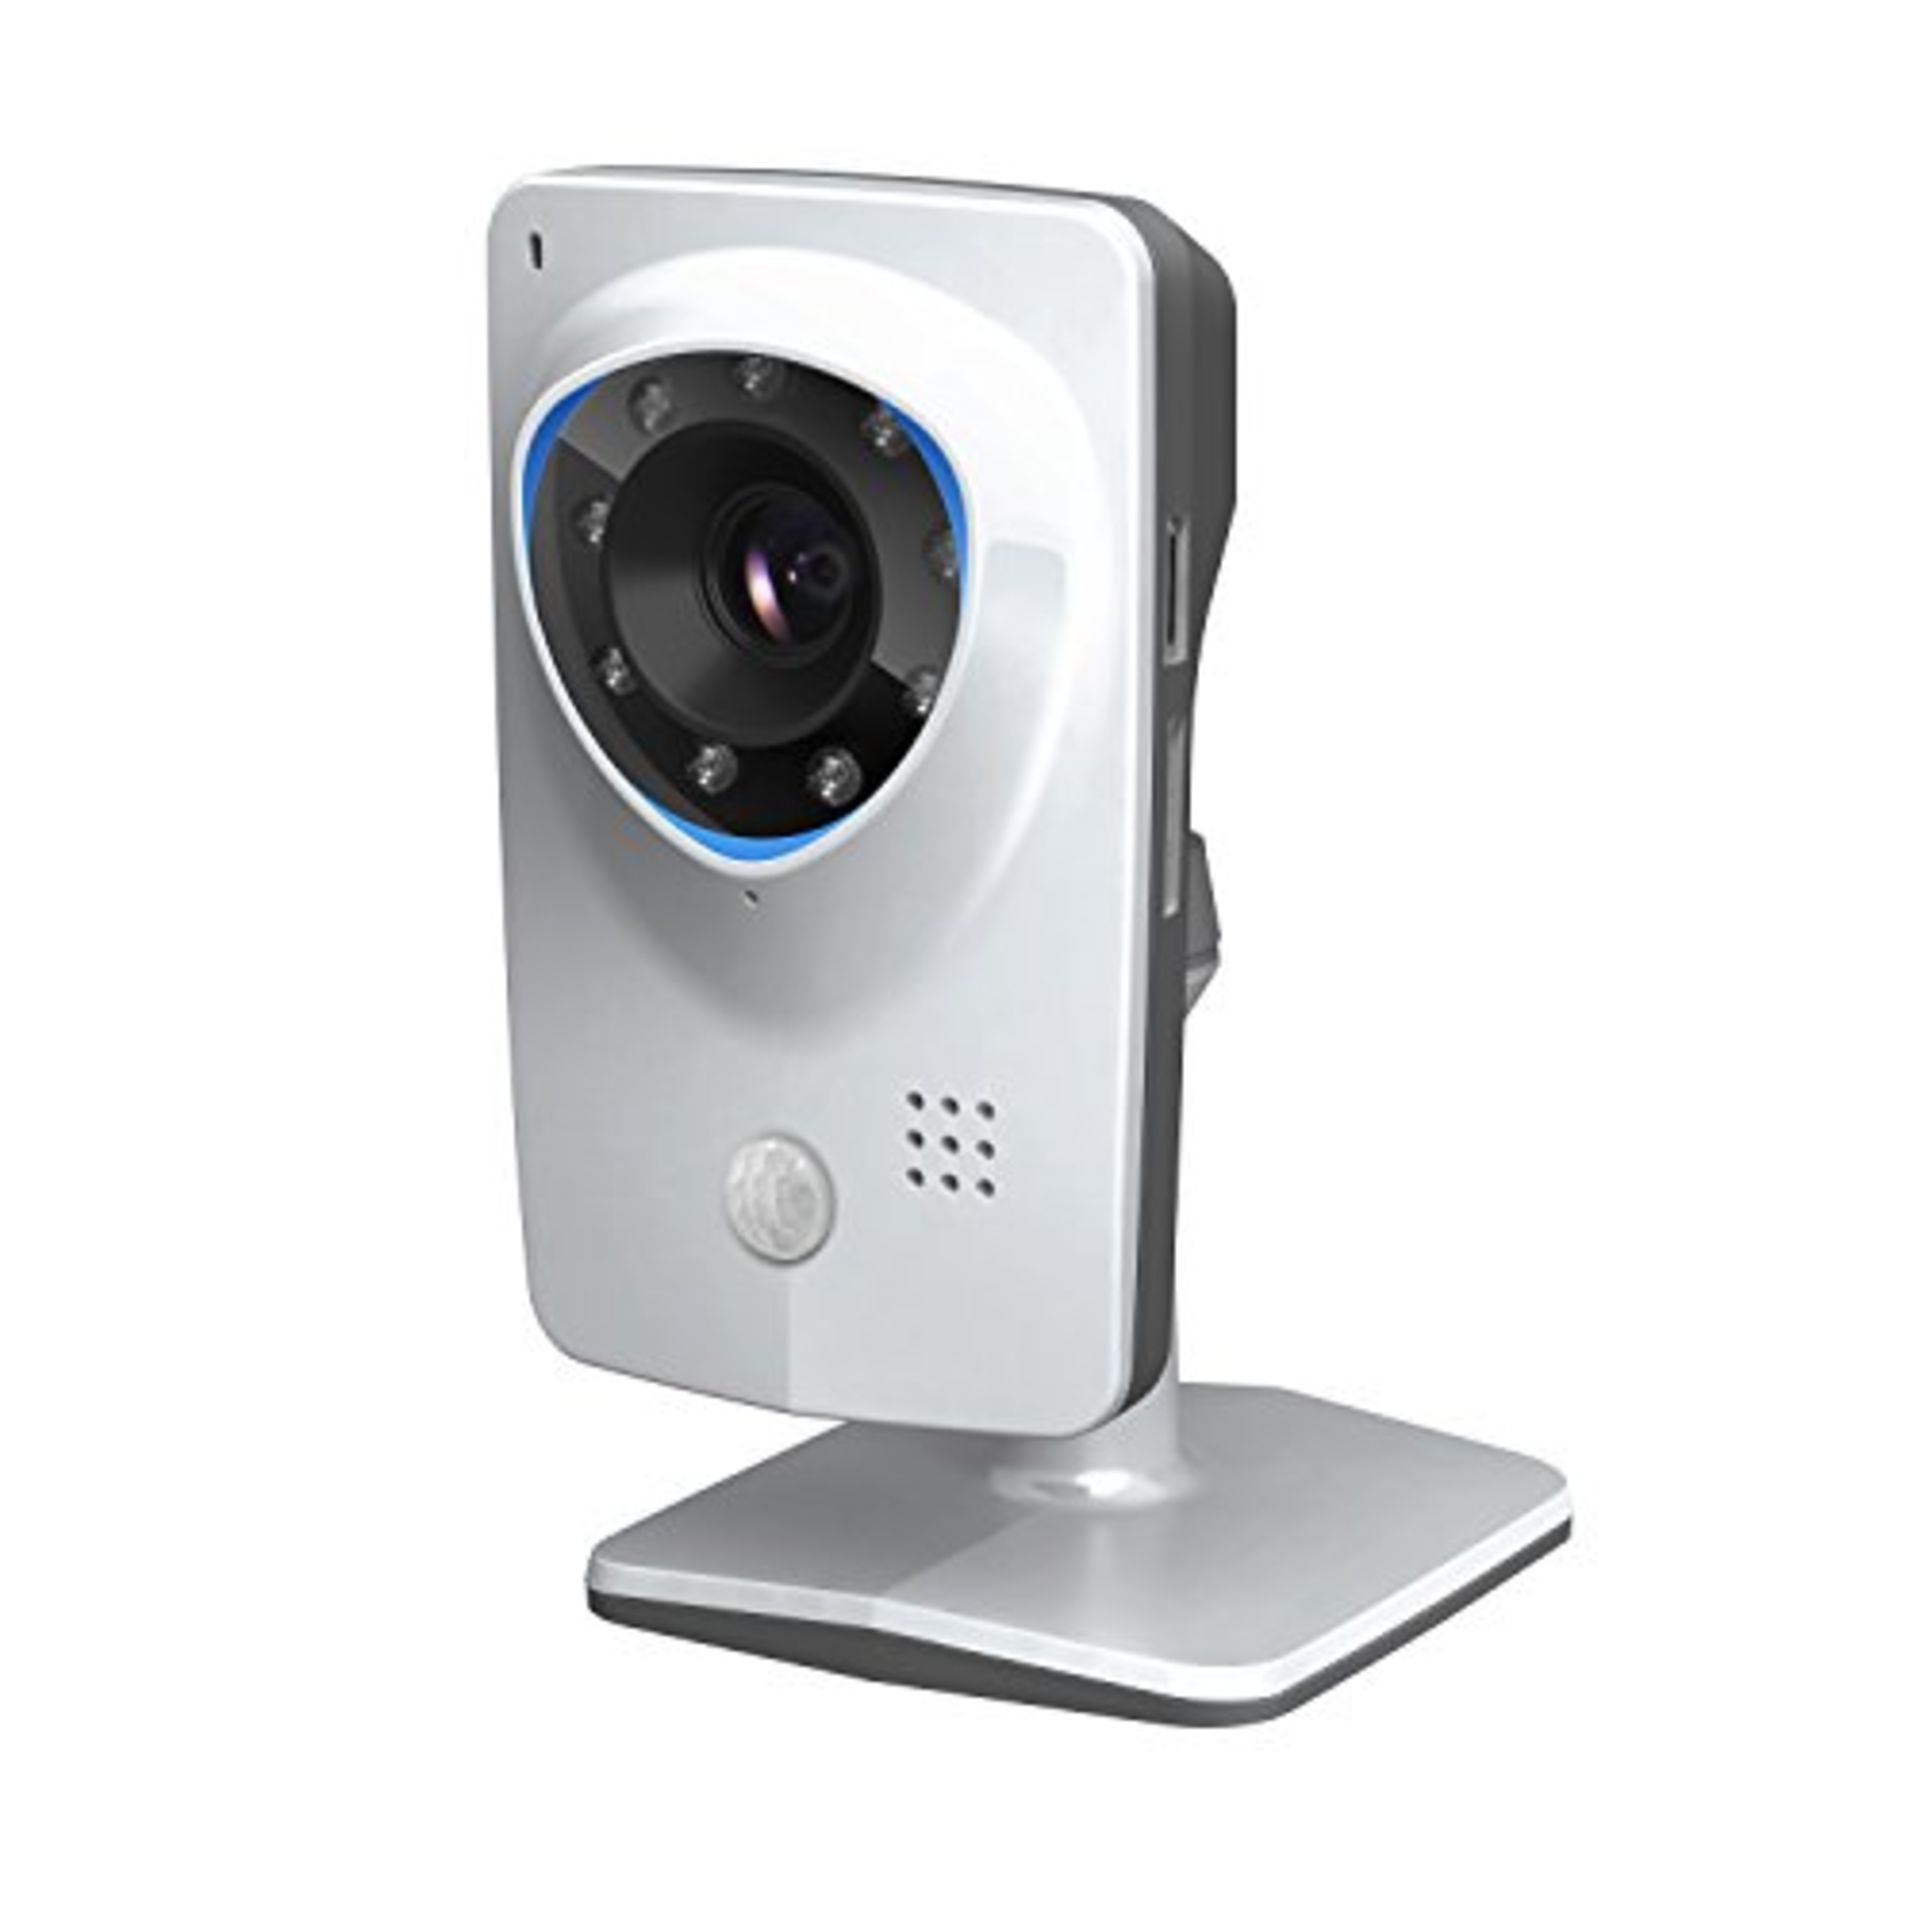 V Grade A Swann Cloud HD Plug & Play Wifi Security Camera With Smart Alerts - Facial Detection -